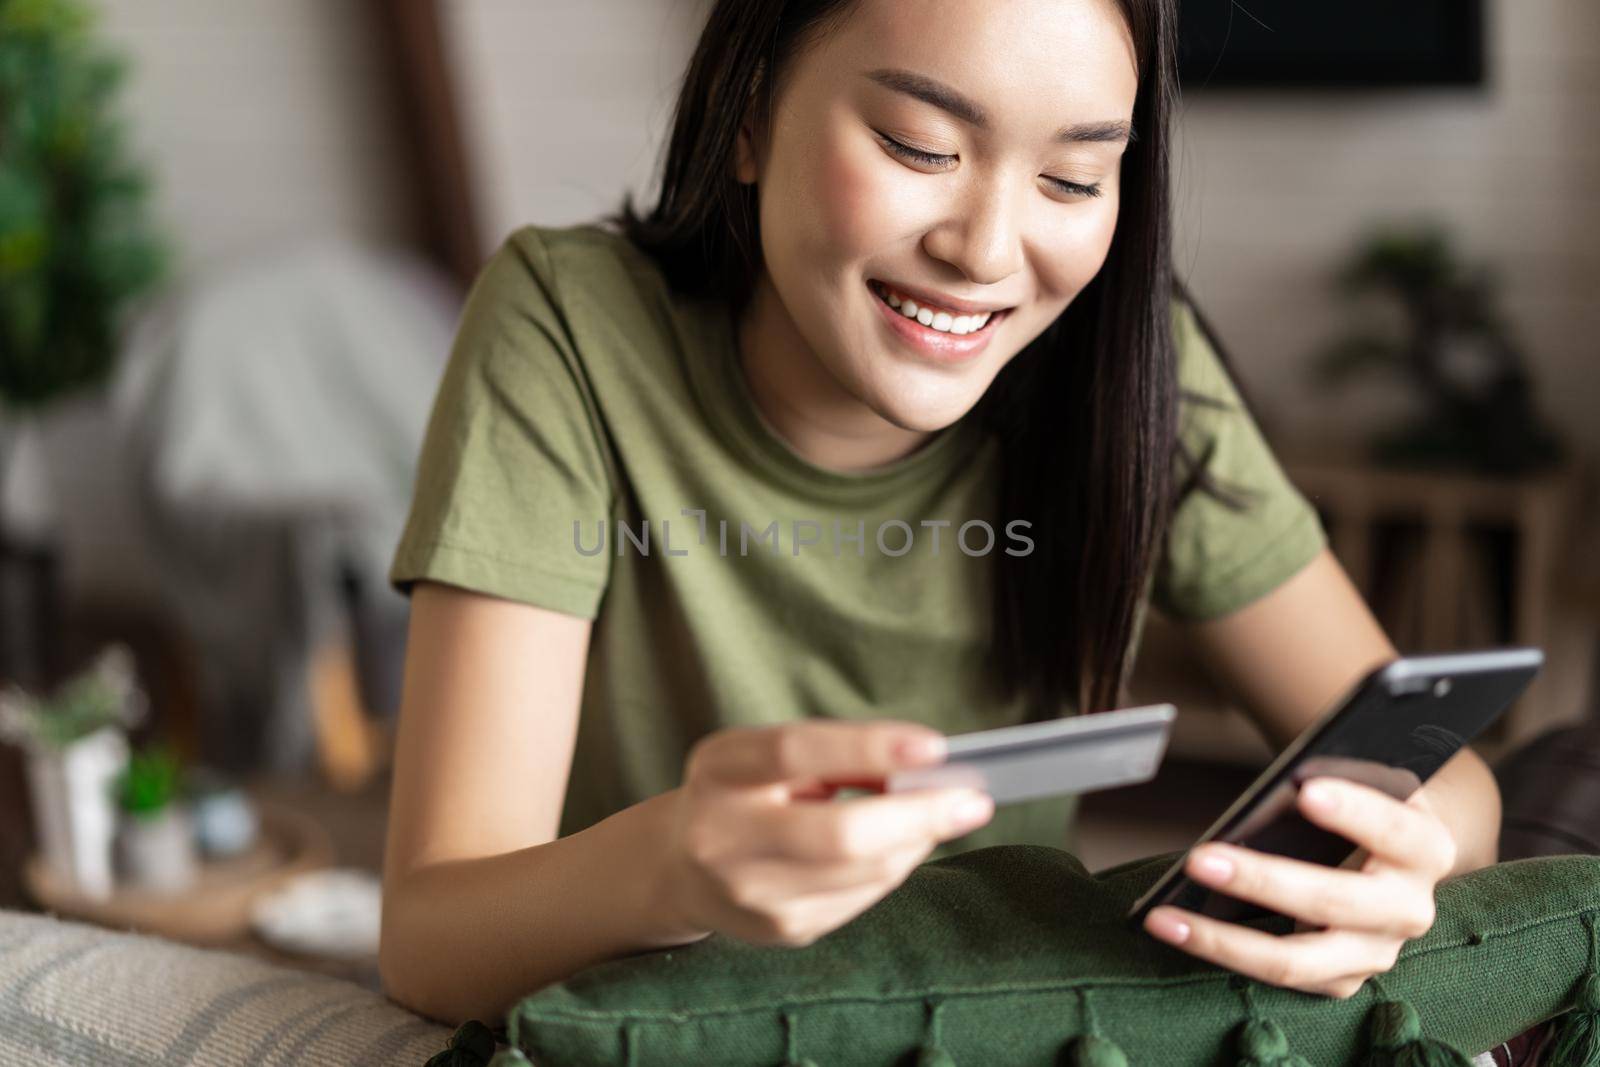 Online shopping. Young asian woman sitting at home and making purchase on mobile phone app, holding credit card.